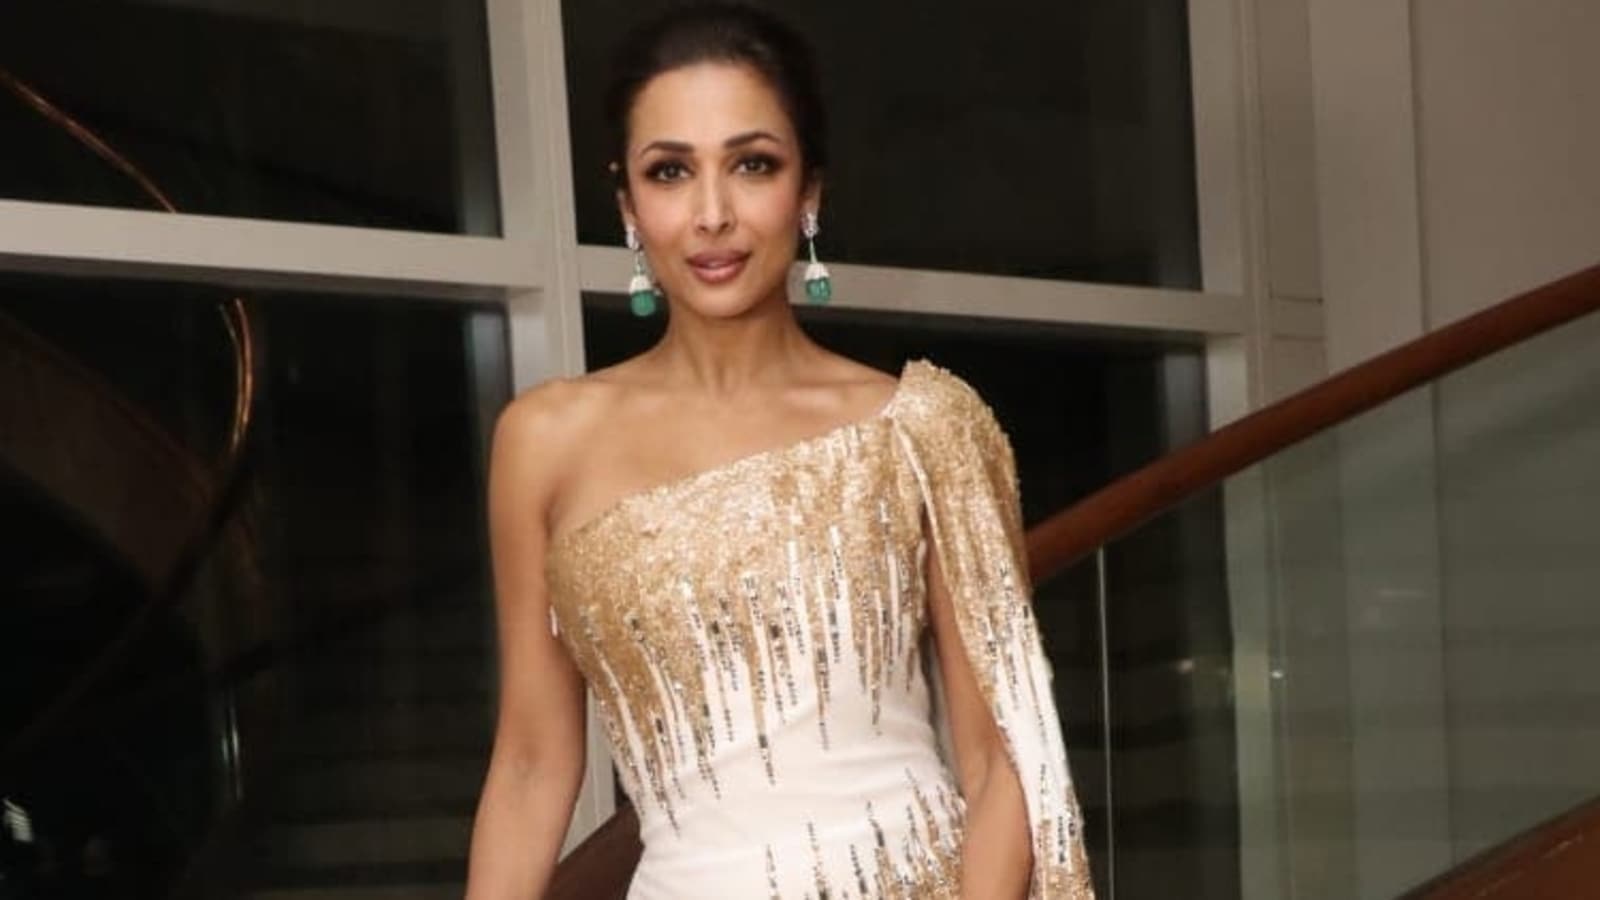 Malaika Arora turns author, will write book on nutrition and wellness ‘to promote good health inside out’